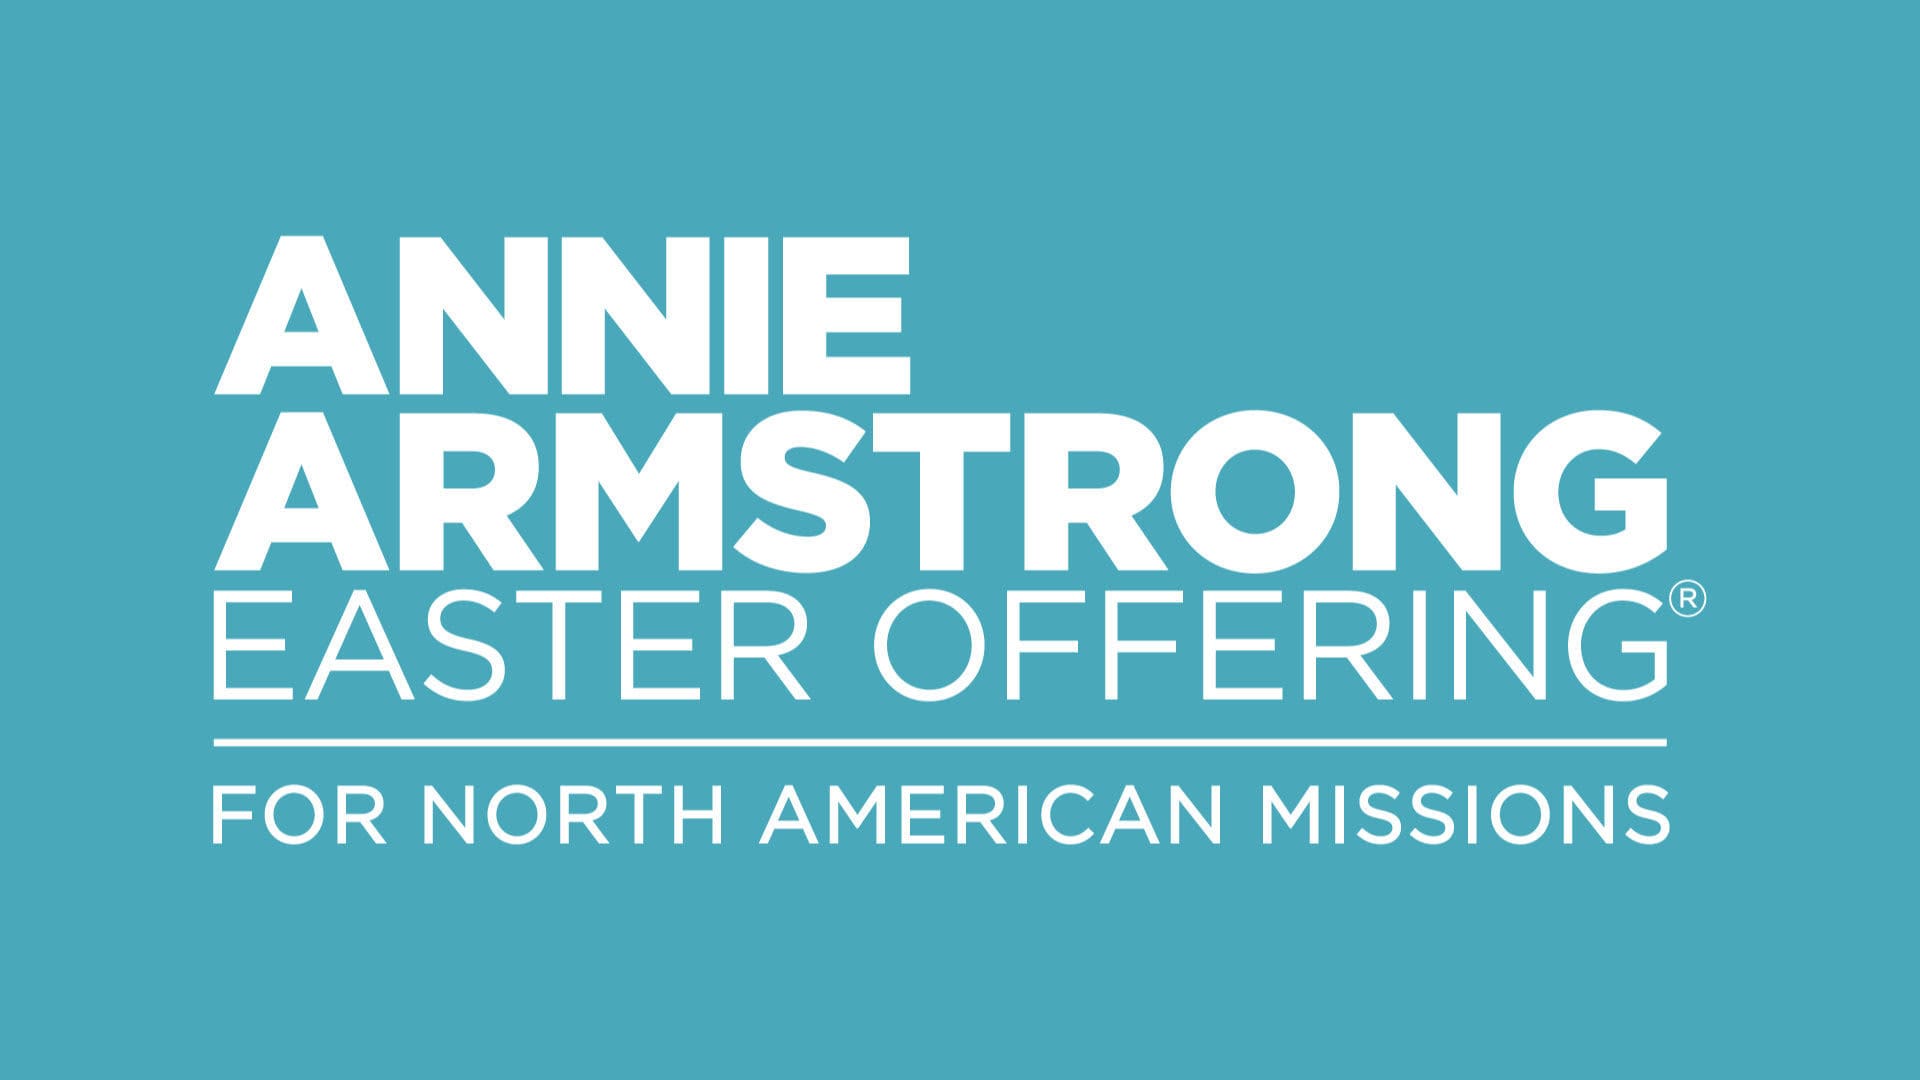 Annie Armstrong ’21 “A New Start For A Dying Church”